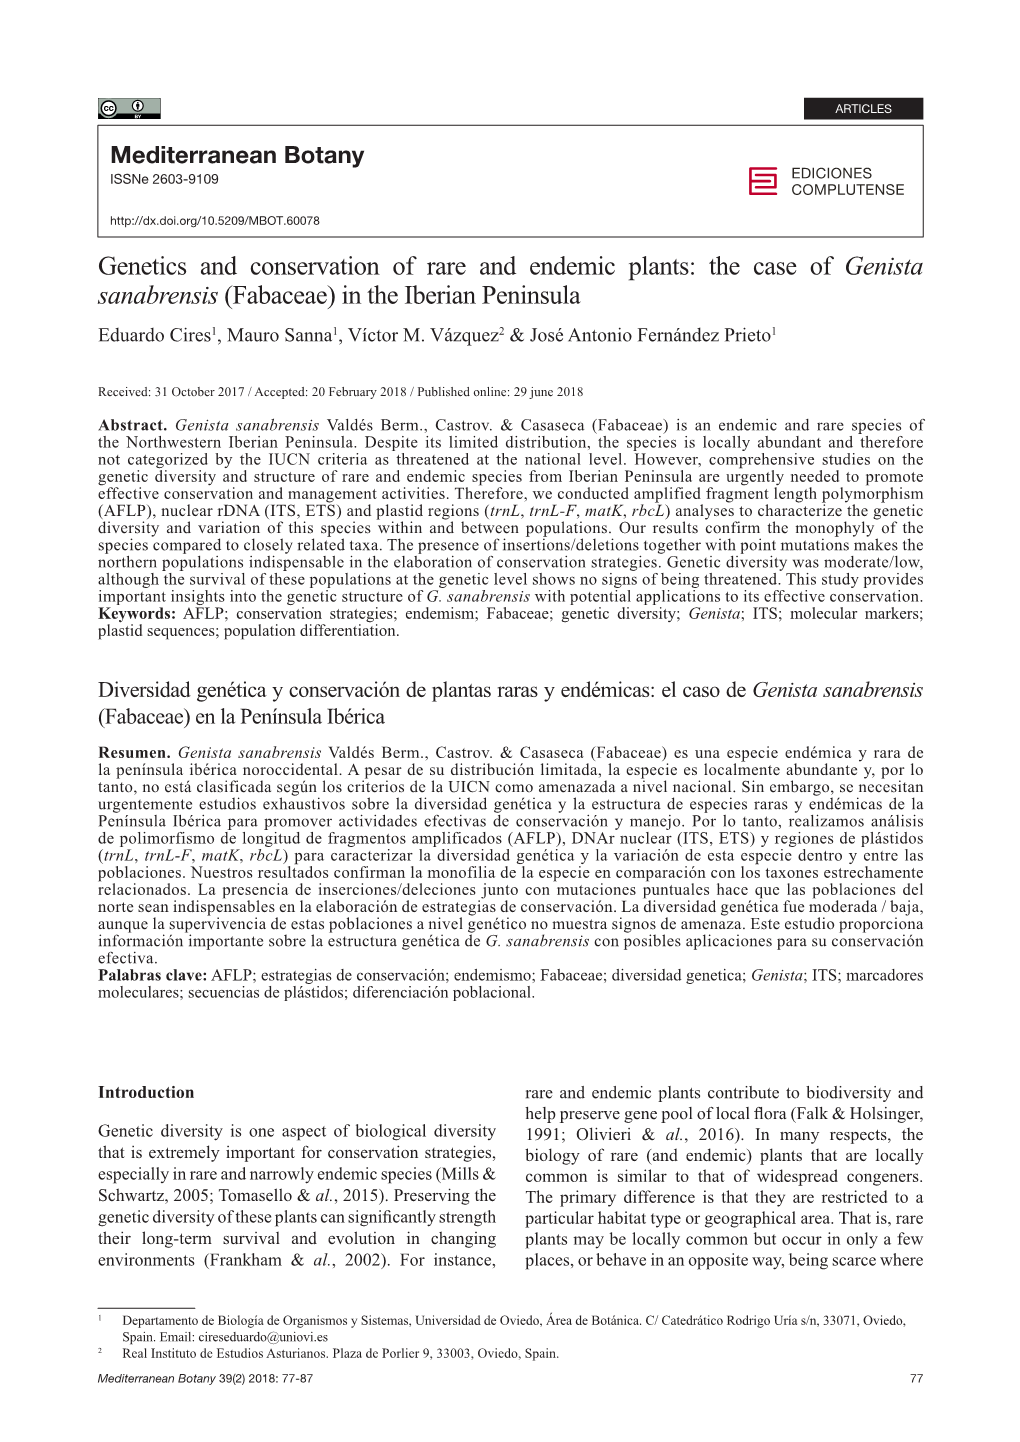 Genetics and Conservation of Rare and Endemic Plants: the Case of Genista Sanabrensis (Fabaceae) in the Iberian Peninsula Eduardo Cires1, Mauro Sanna1, Víctor M